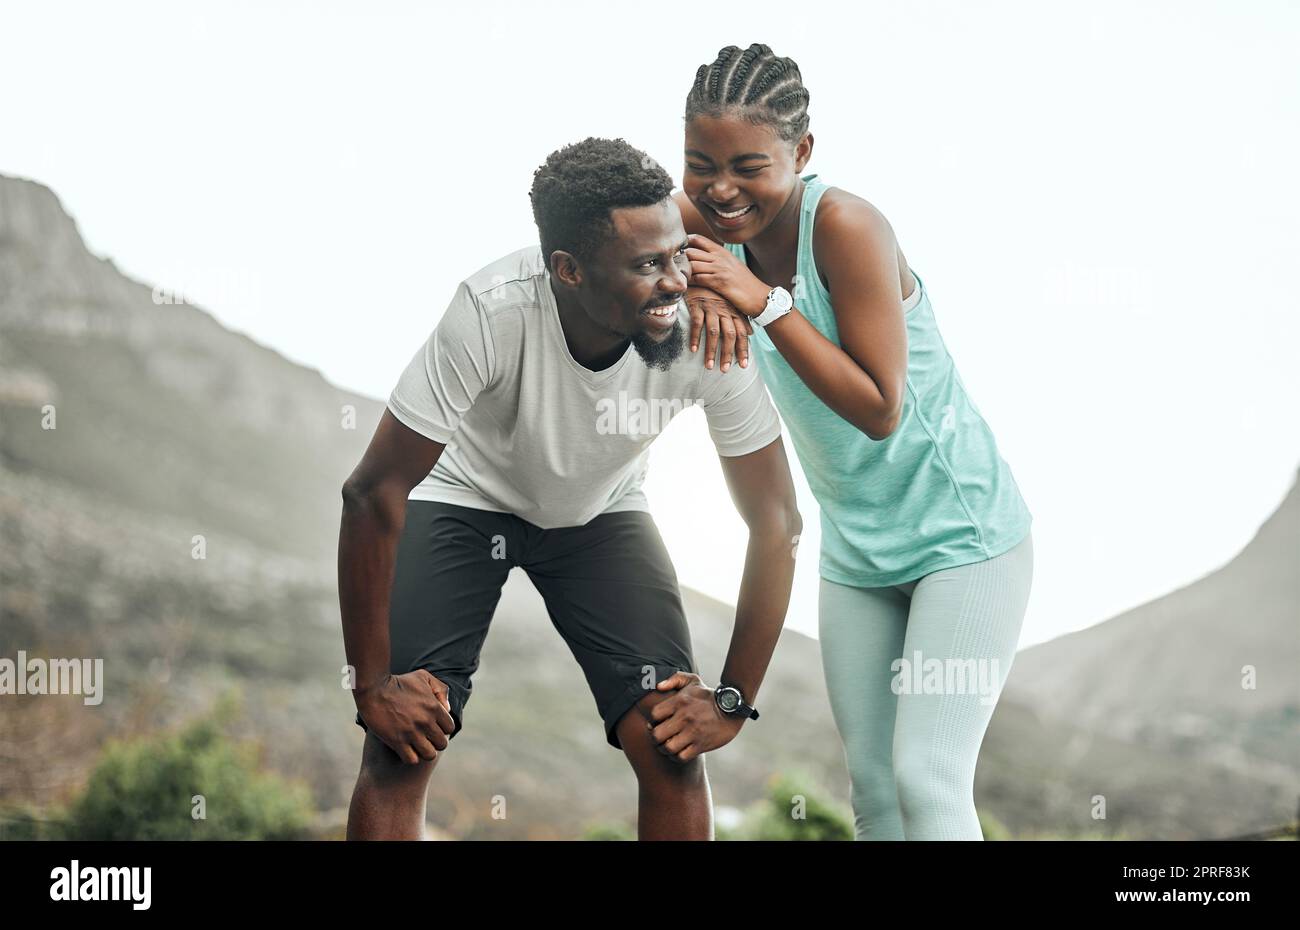 Taking break to catch our breath. a young couple taking a break during a workout Stock Photo